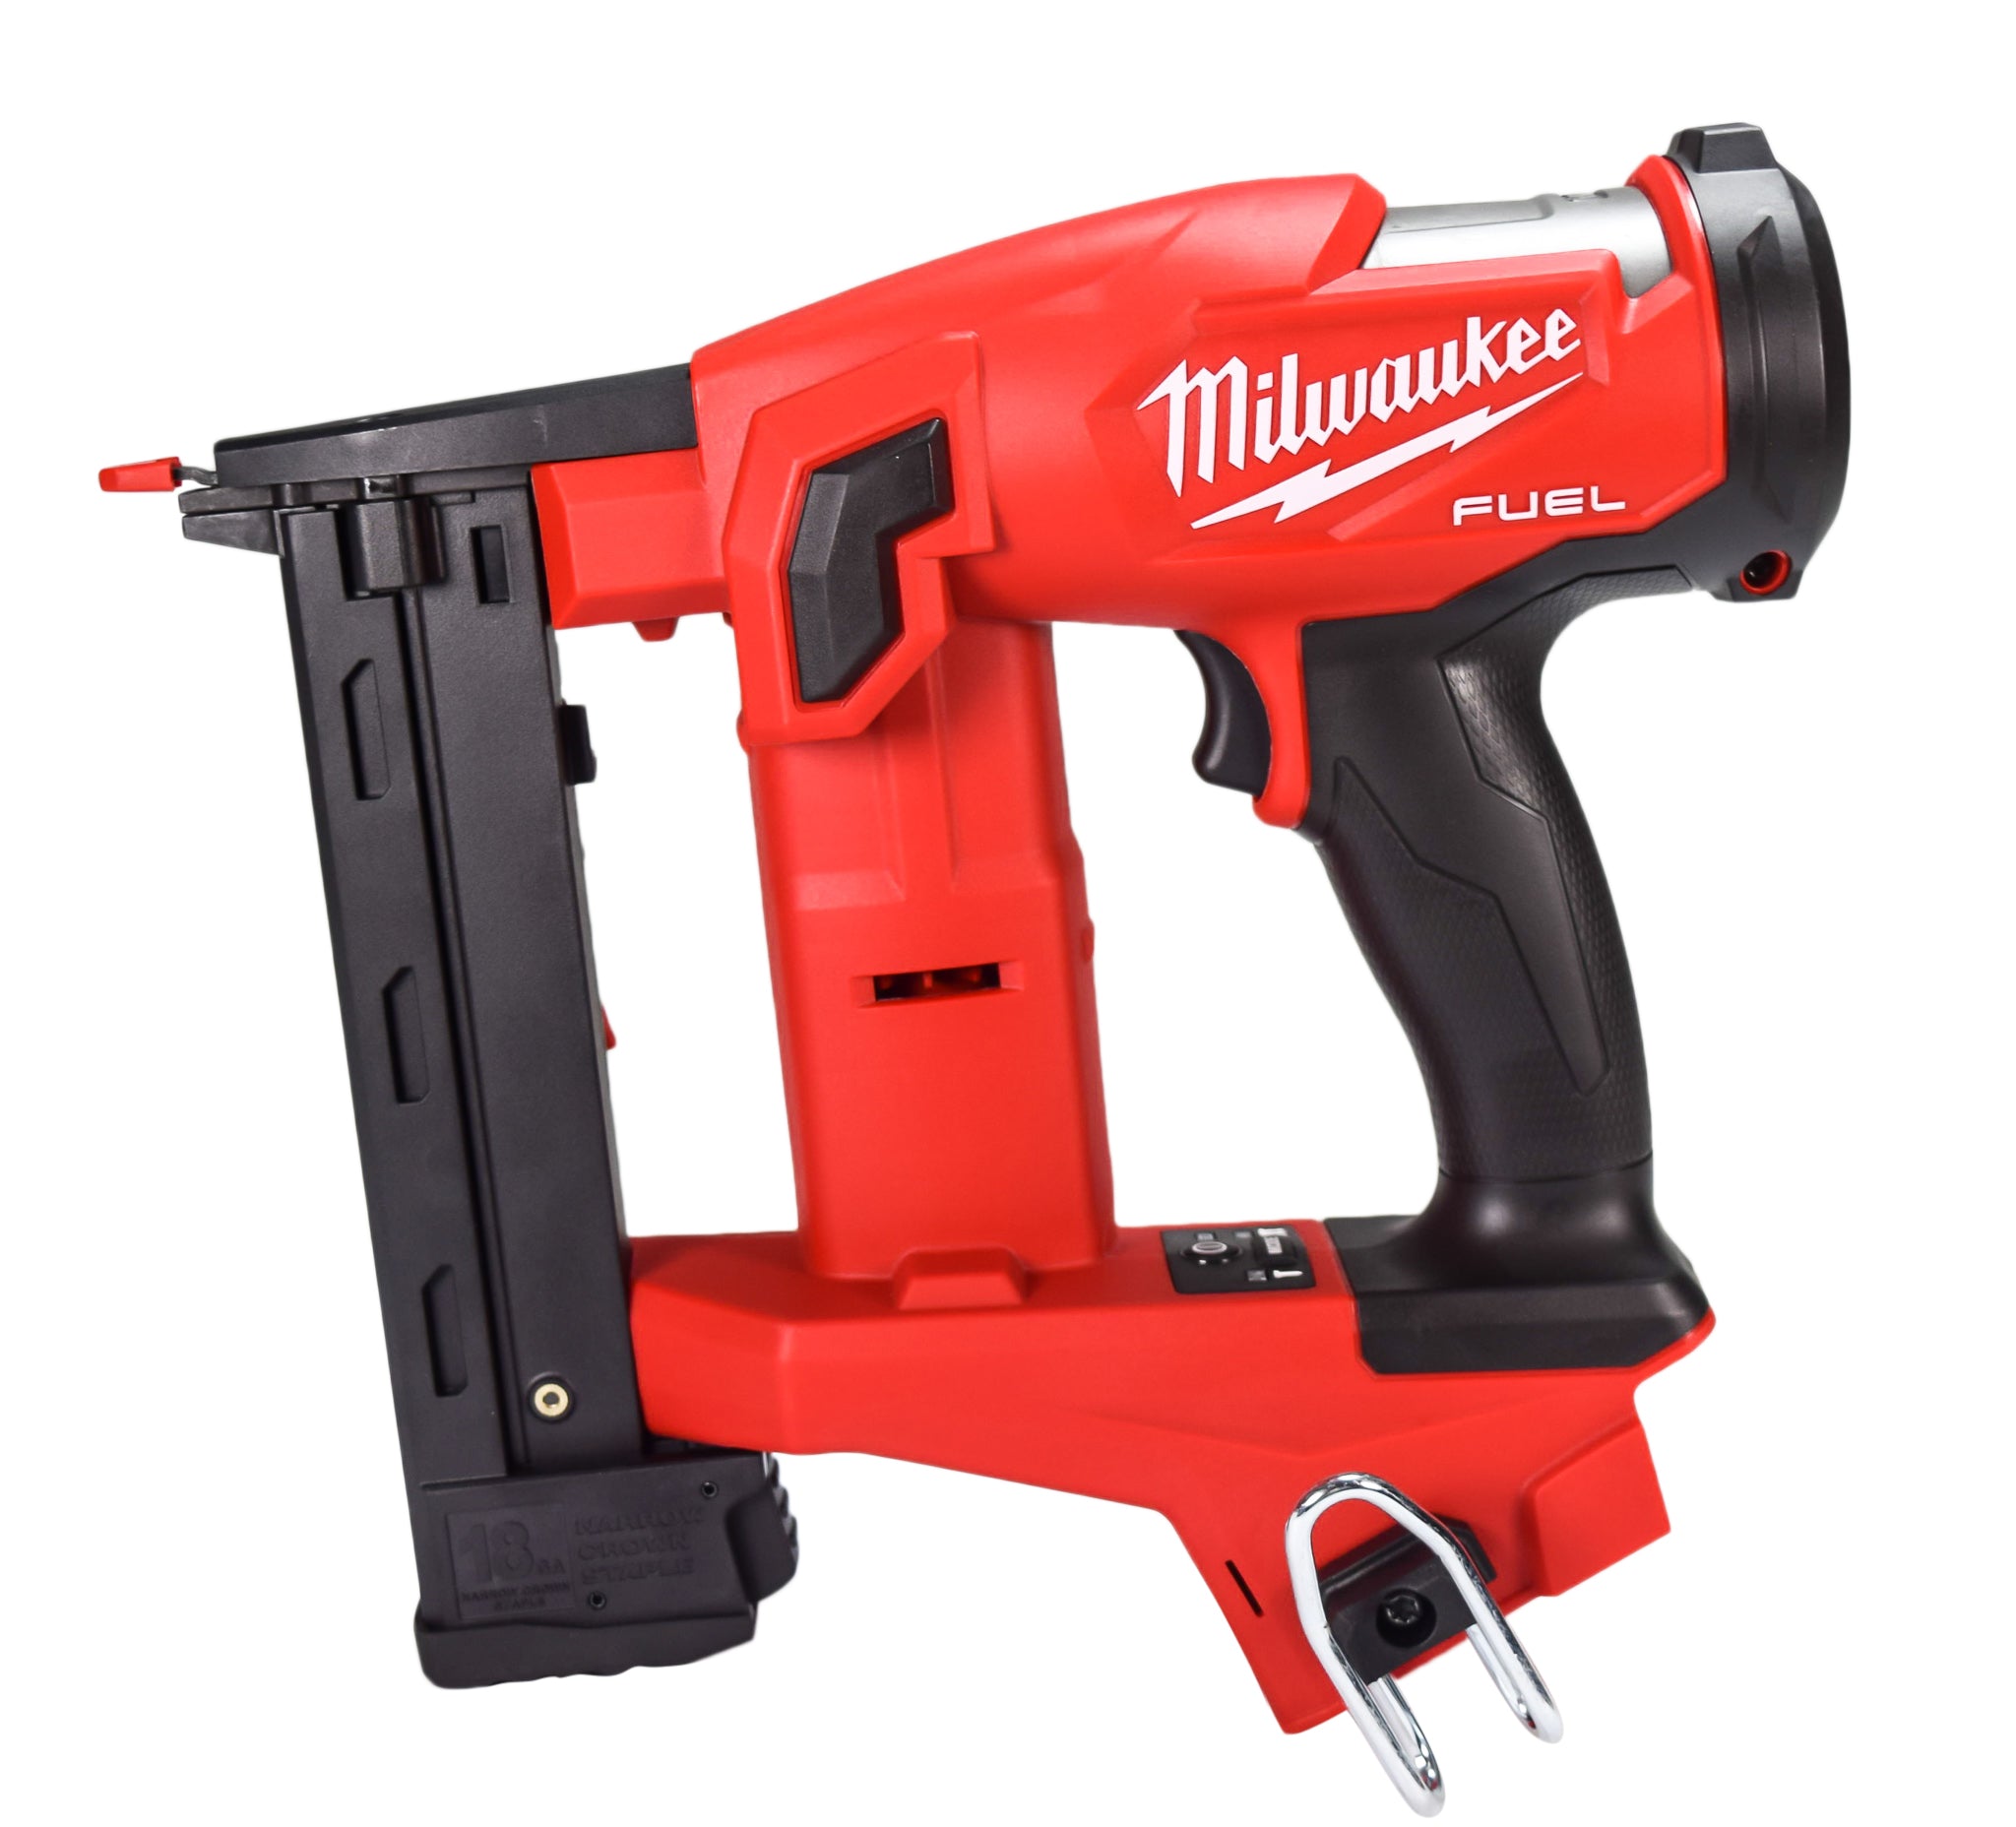 Milwaukee 2749-20 M18 FUEL Lithium-Ion 18 Gauge 1/4 in. Cordless Narrow Crown Stapler (Tool Only)